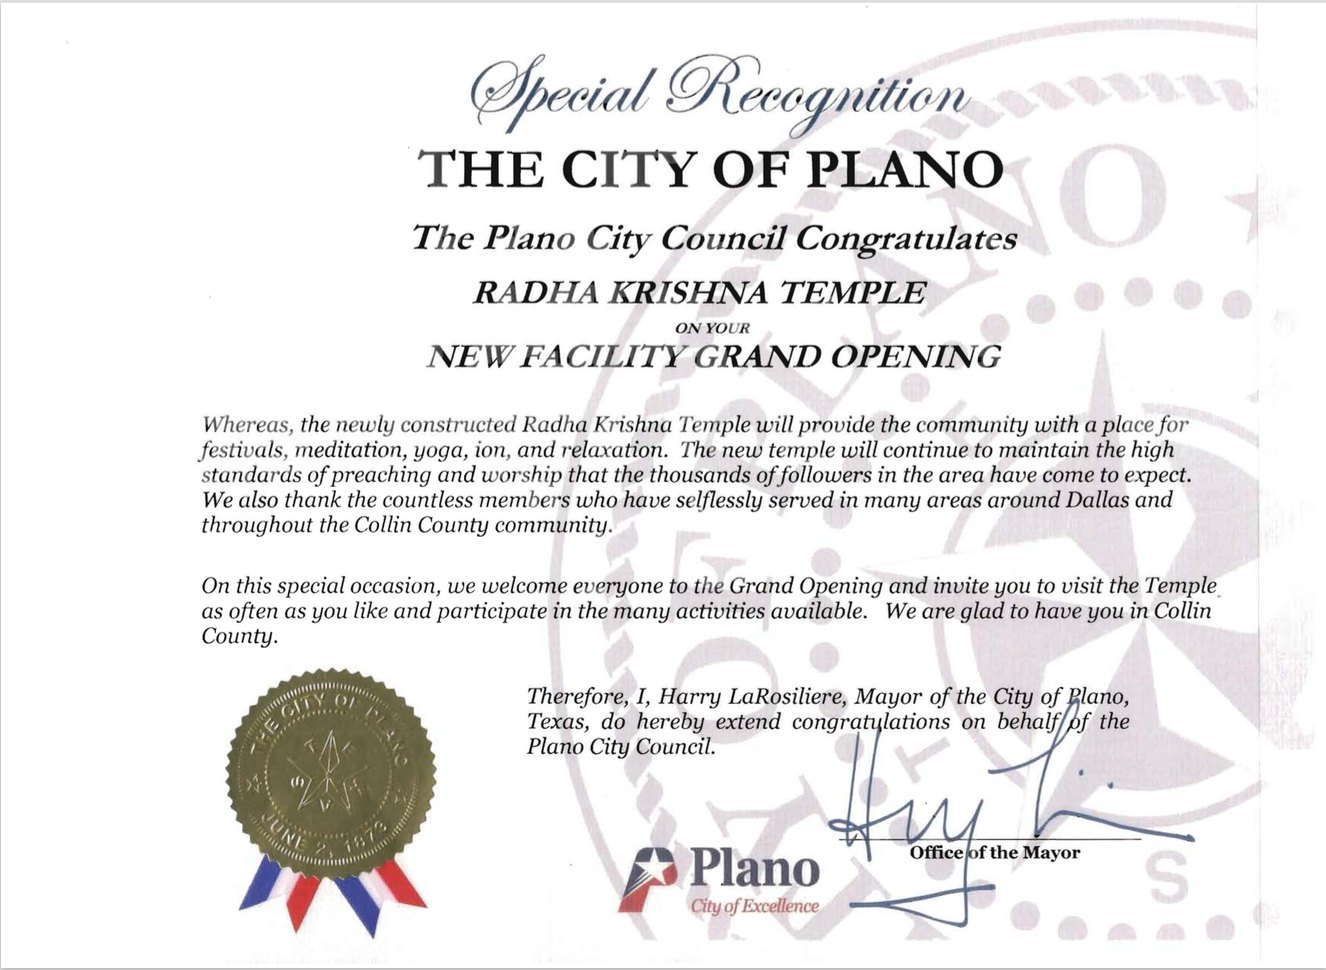  Special Recognition by the Plano City Council